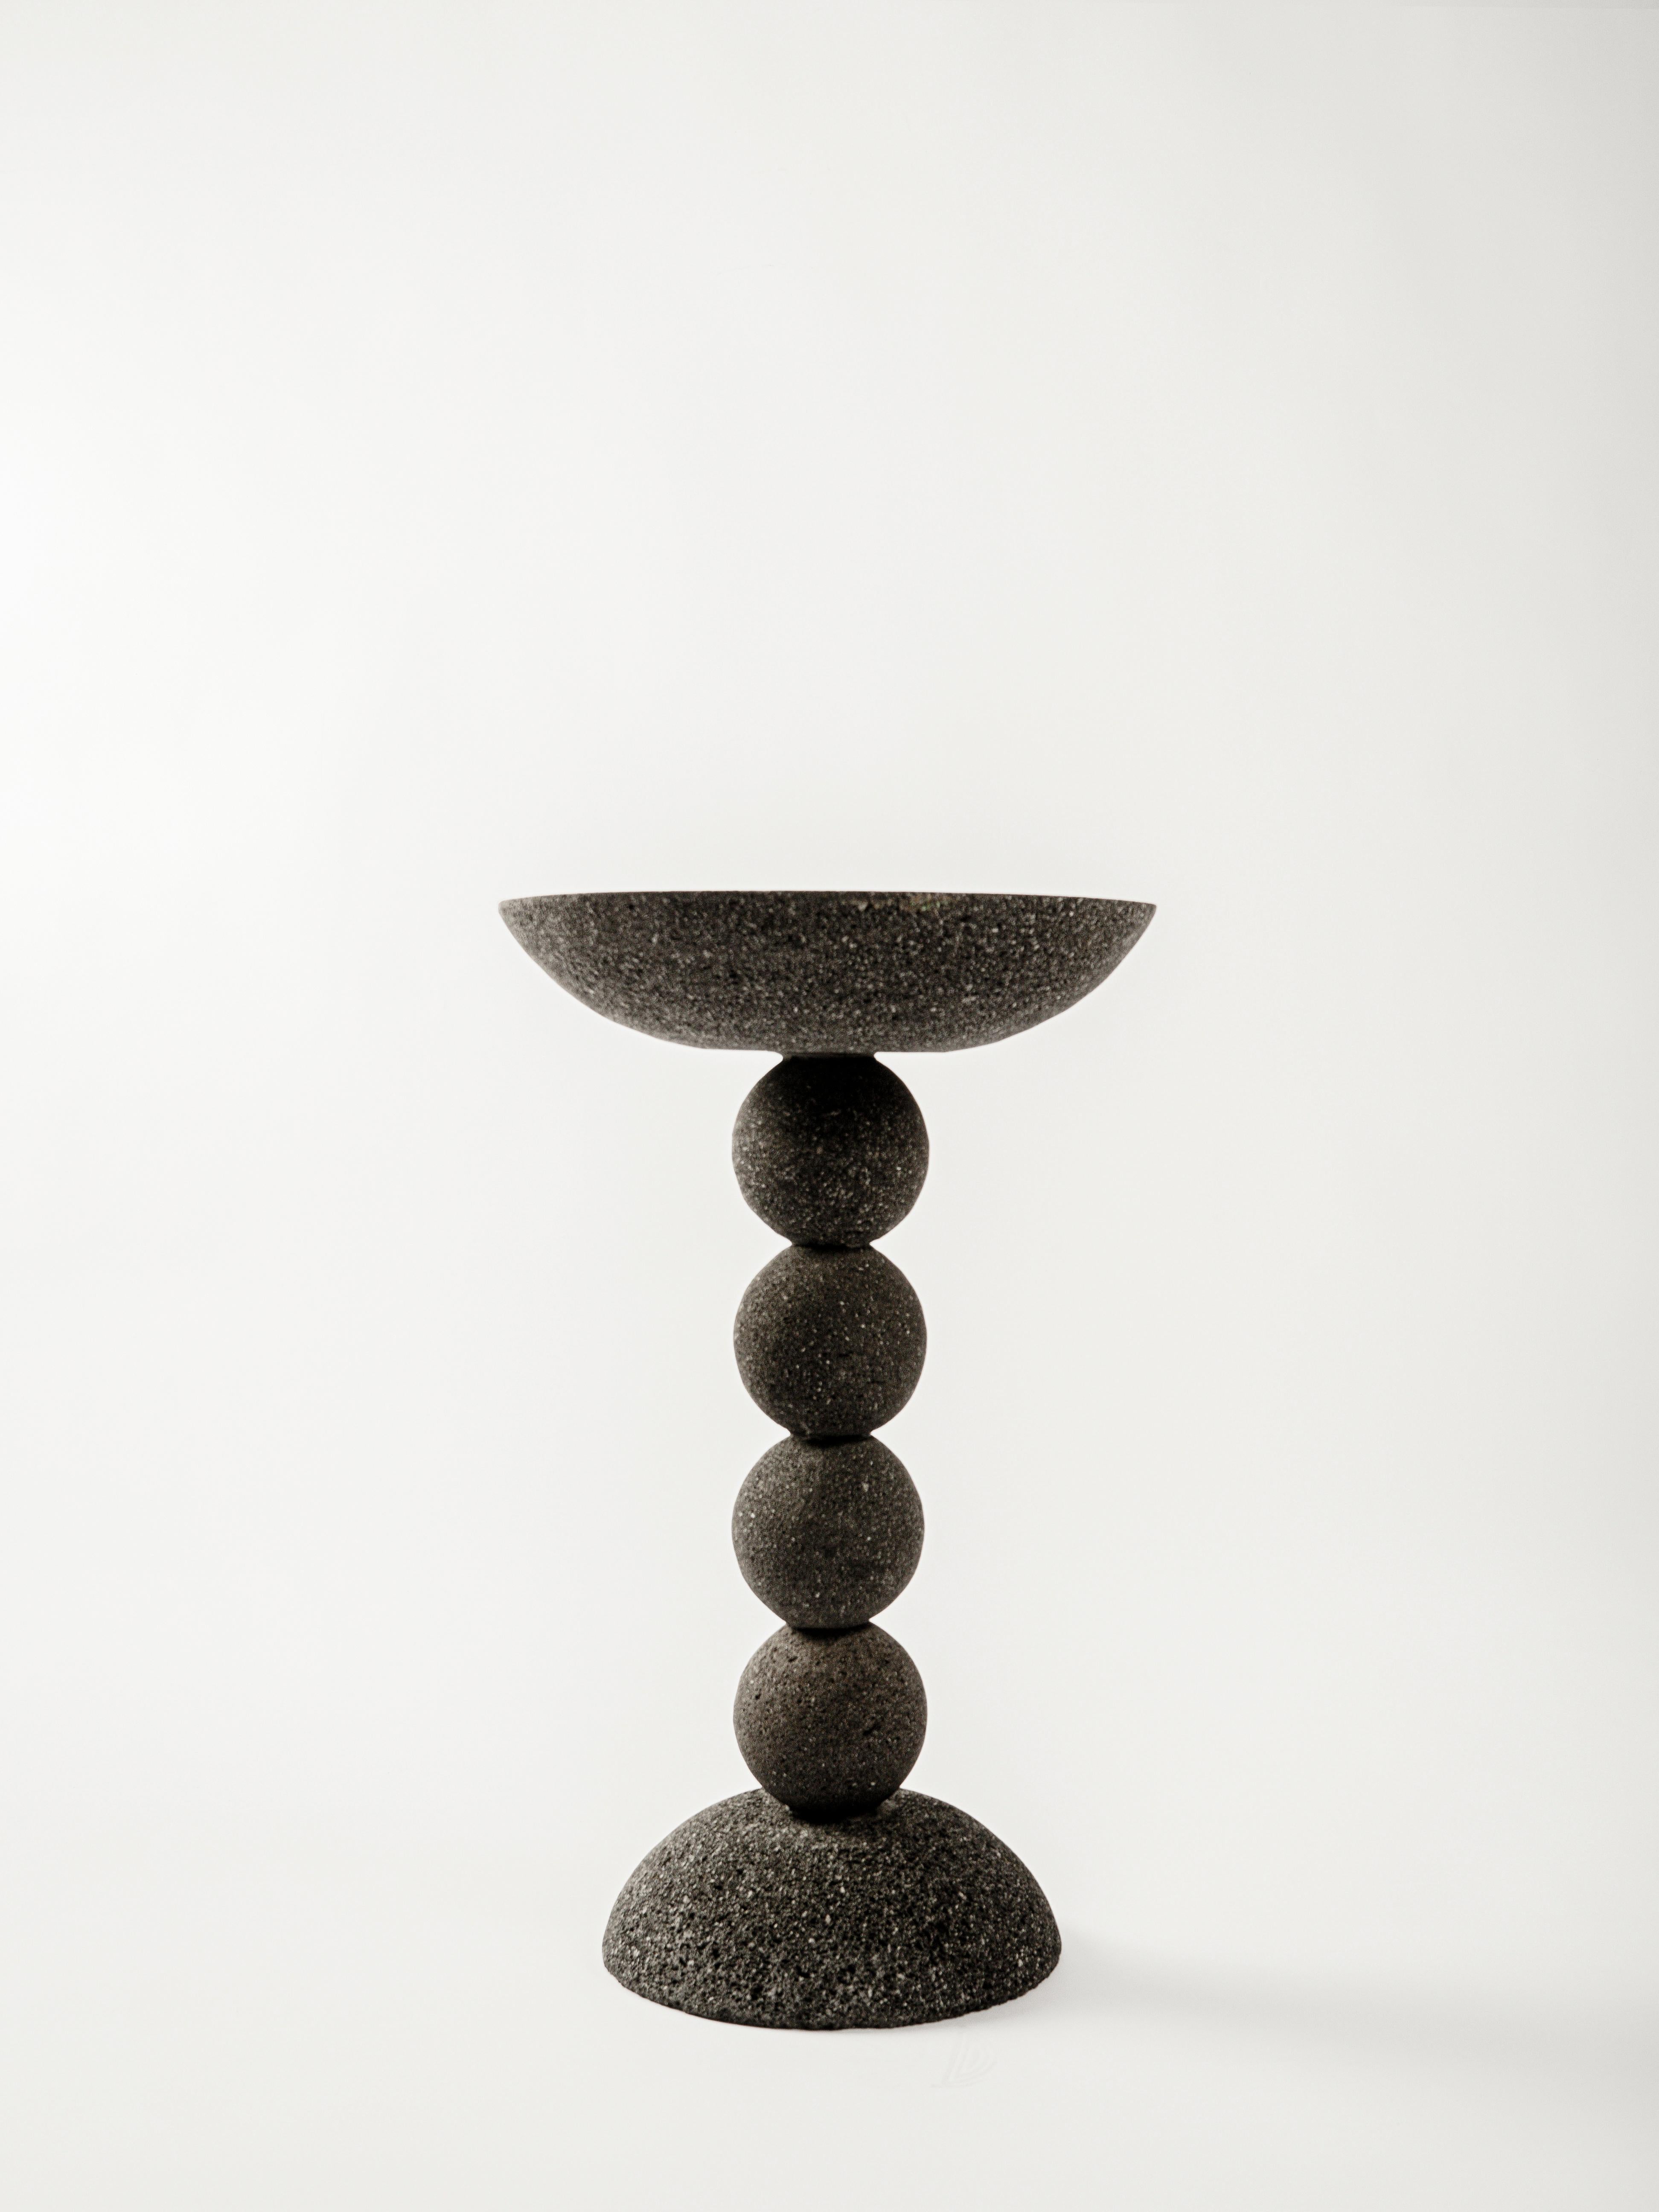 Totem 01 Volcanic Stone by Daniel Orozco
Material: Volcanic Stone
Dimensions: D 34 x H 55 cm

Handmade by Mexican artisans.

Daniel Orozco Estudio
We are an inclusive interior design estudio, who love to work with fabrics and natural textiles in